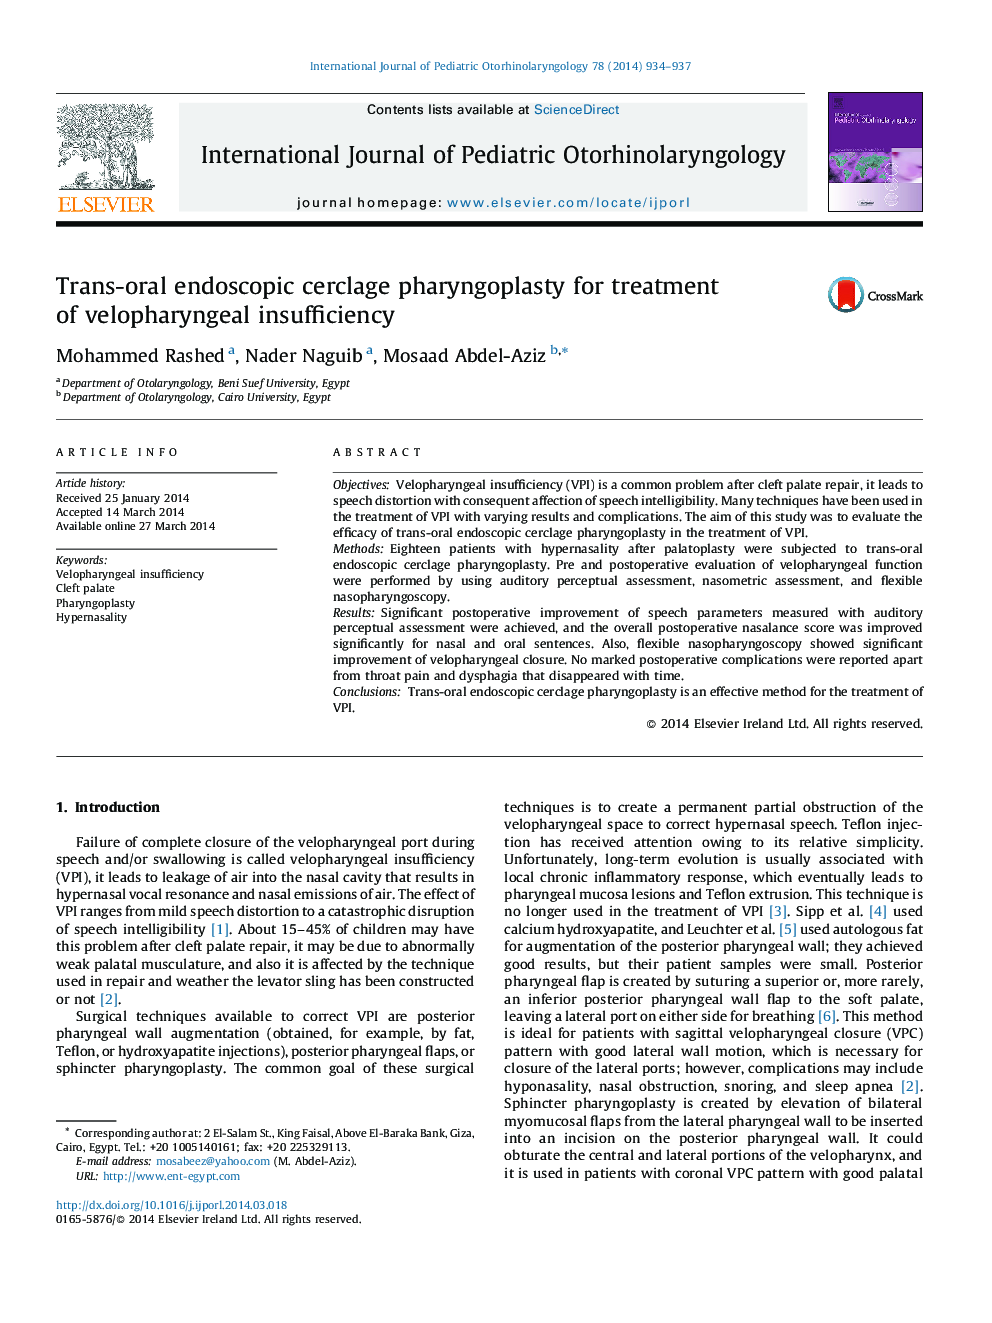 Trans-oral endoscopic cerclage pharyngoplasty for treatment of velopharyngeal insufficiency